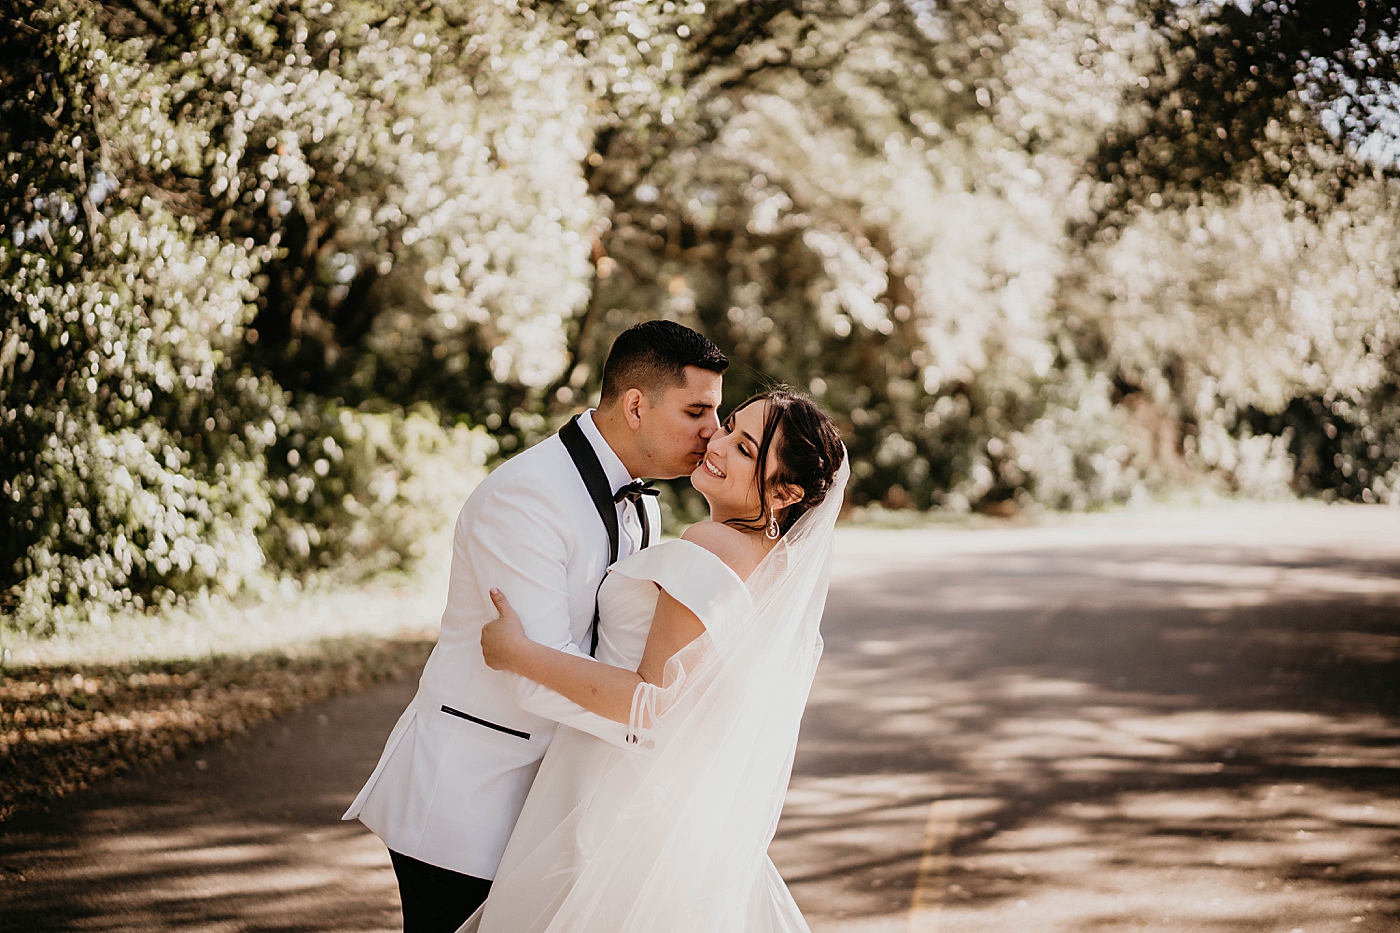 Groom kissing Bride on the road Lavan Venue Wedding Photography captured by South Florida Wedding Photographer Krystal Capone Photography